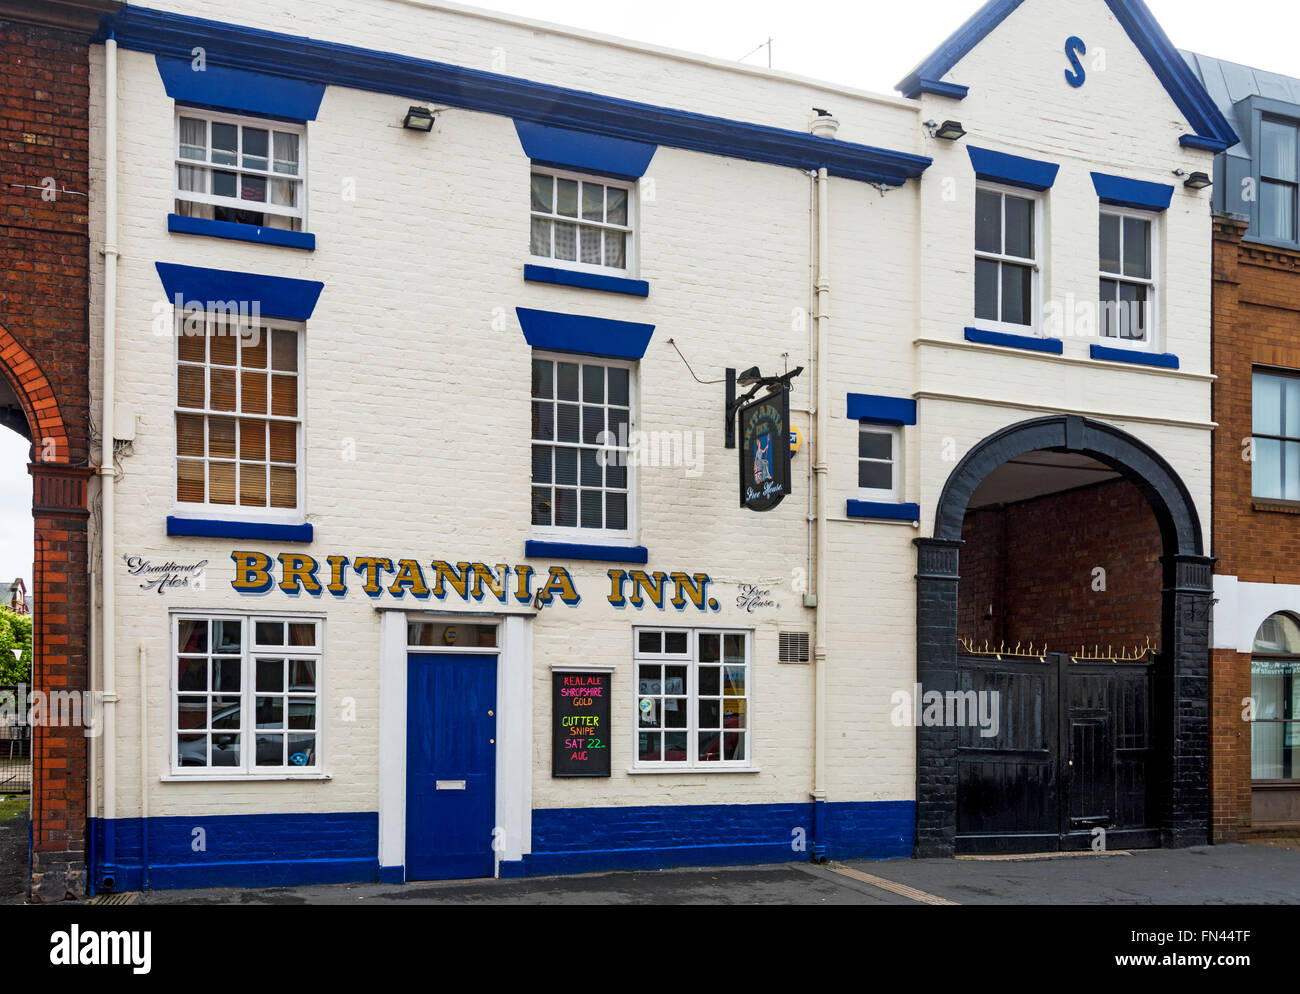 The Brittania Inn, Castle Foregate, Shrewsbury, Shropshire, England, UK.  Until 1856 it was called the Engine and Tender. Stock Photo